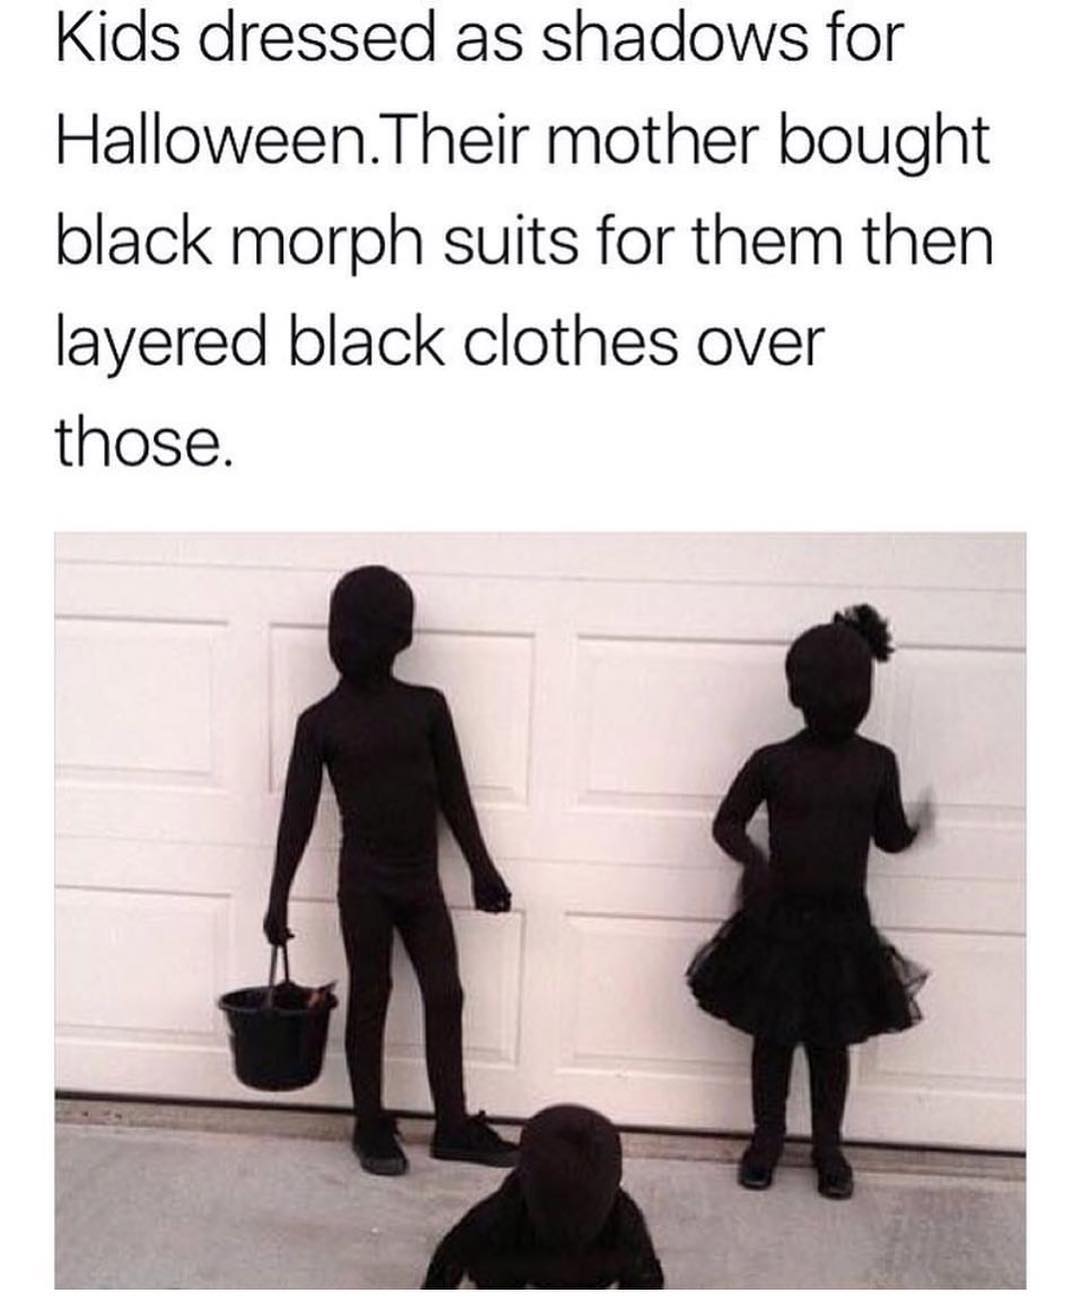 Kids dressed as shadows for Halloween. Their mother bought black morph suits for them then layered black clothes over those.